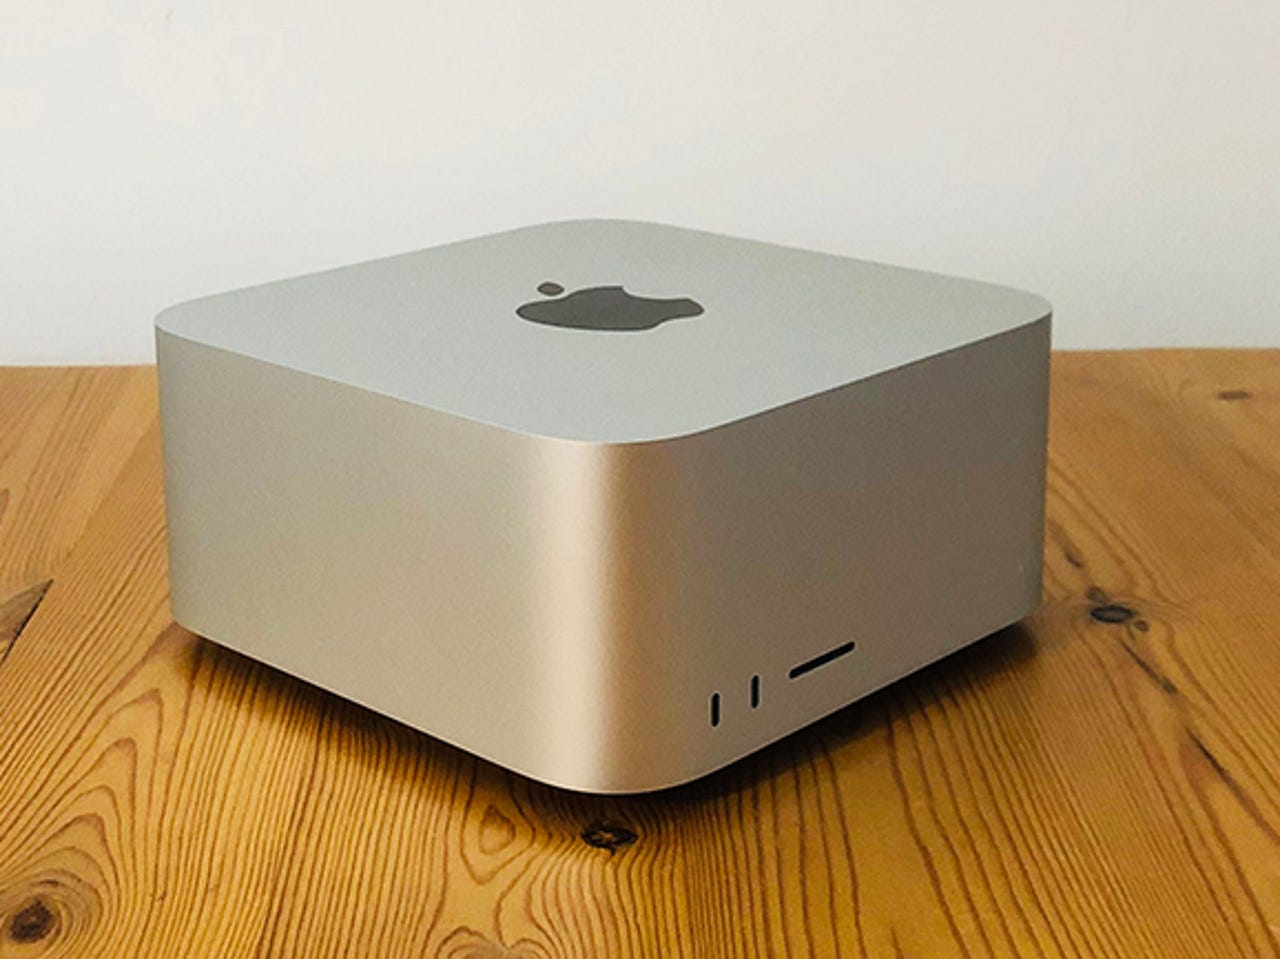 M1 Mac mini can drive six displays with peripherals - but you